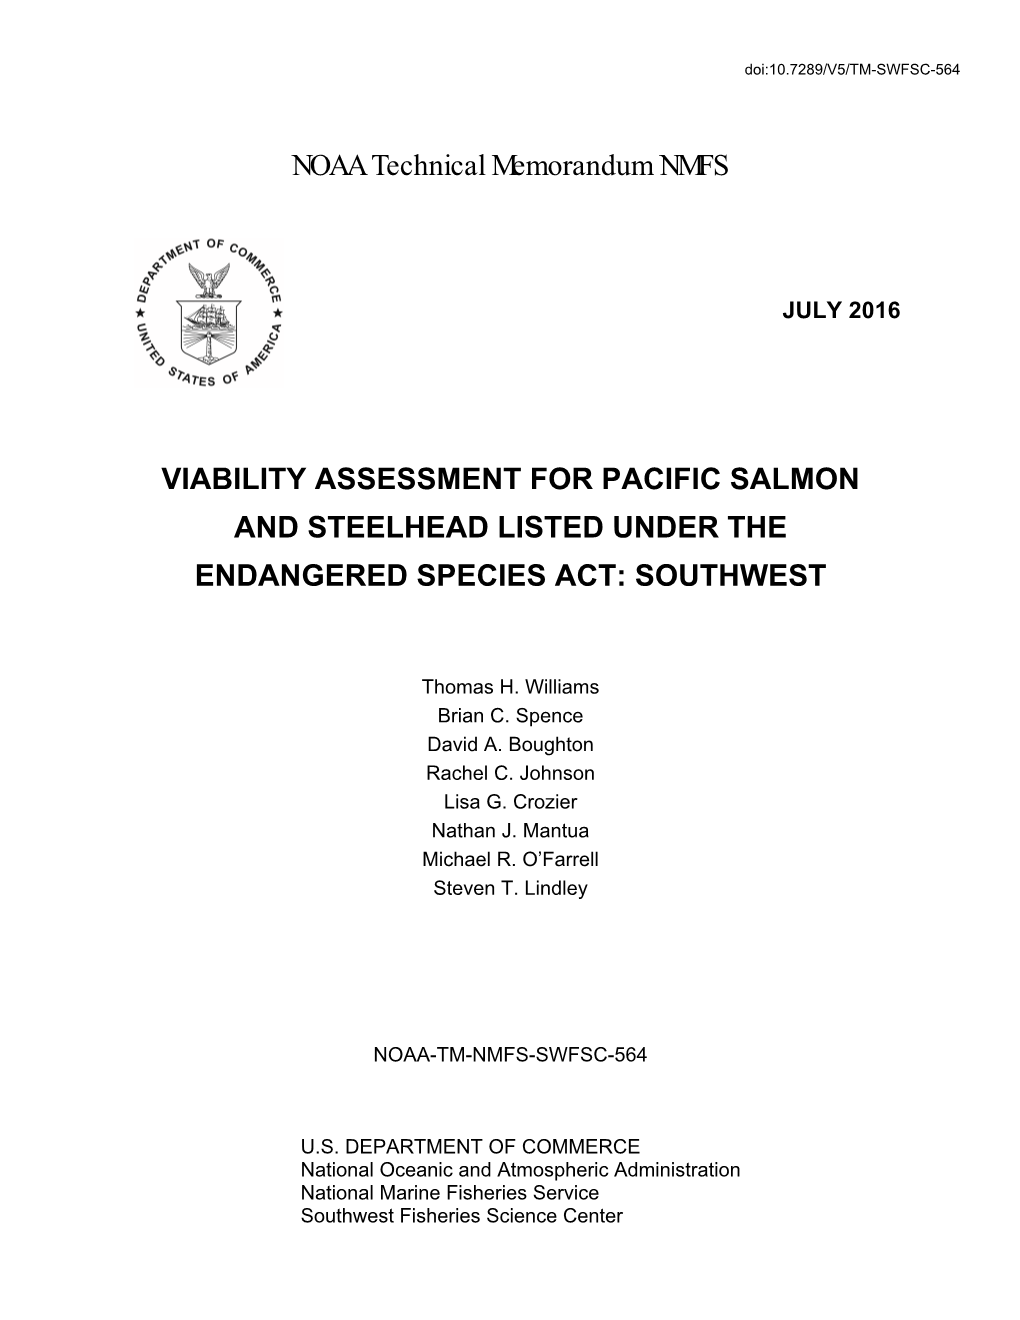 Viability Assessment for Pacific Salmon and Steelhead Listed Under the Endangered Species Act: Southwest